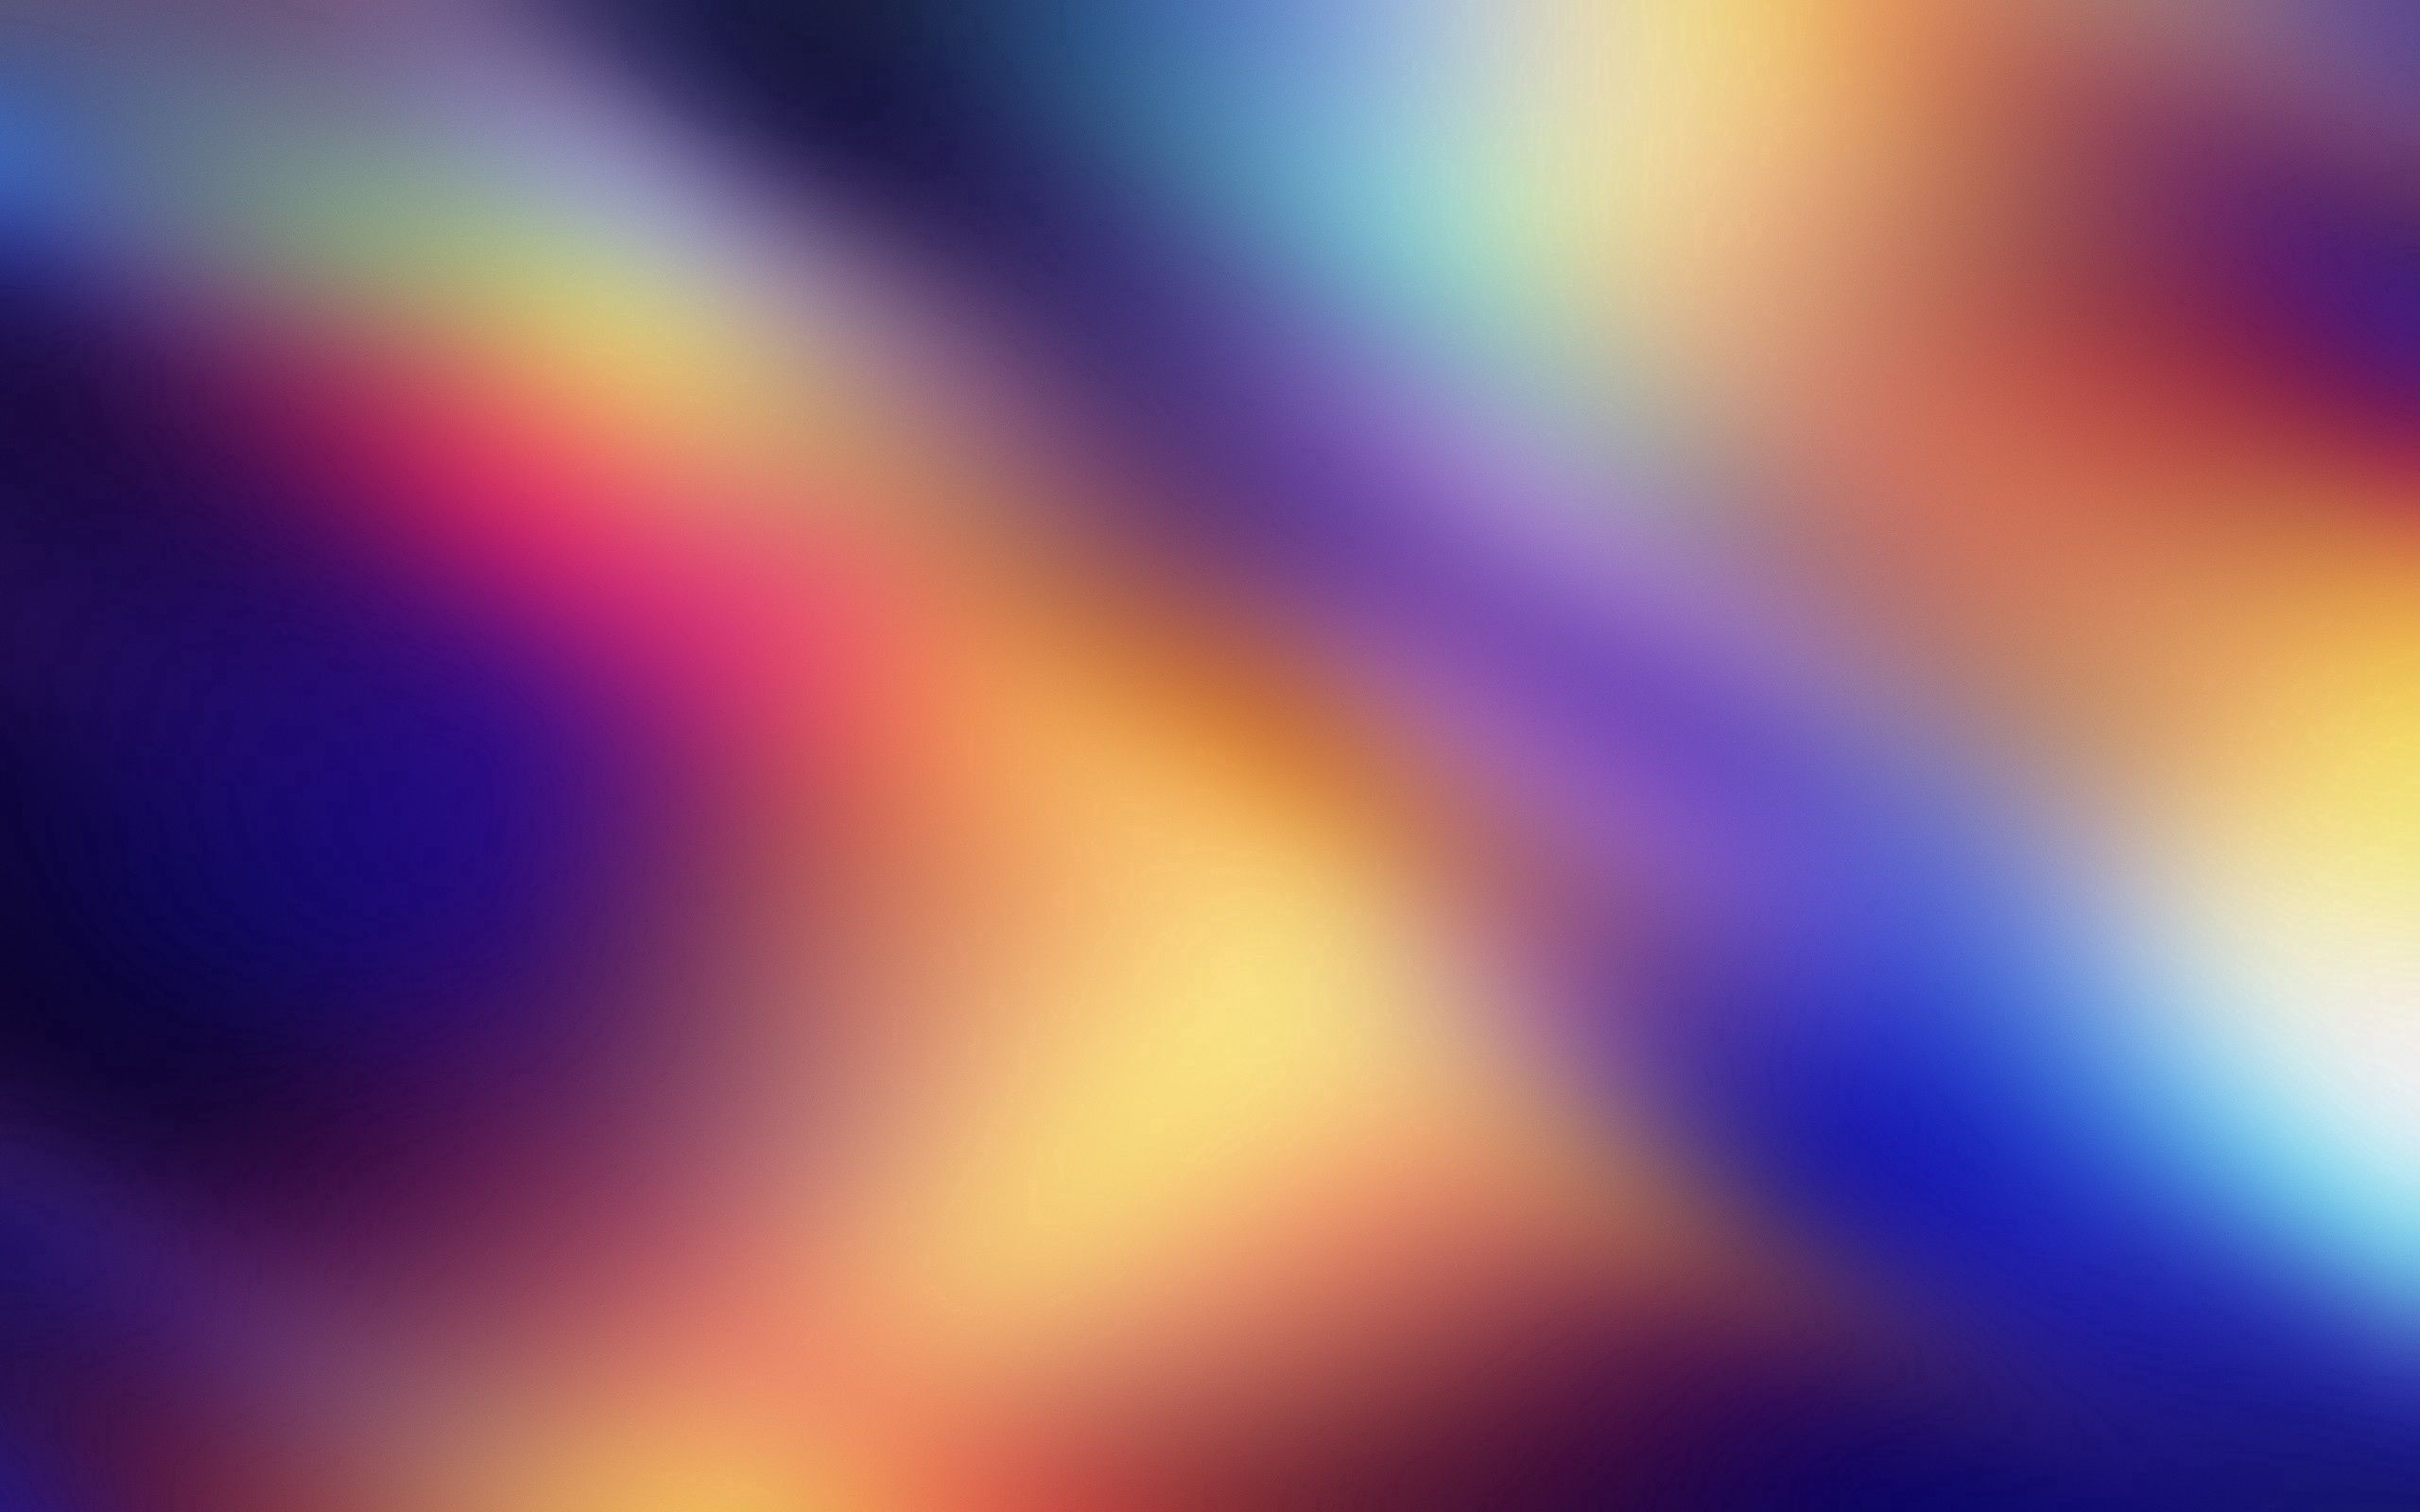 colorful, blurred, abstract, rainbow, colourful, iridescent, greased cellphone